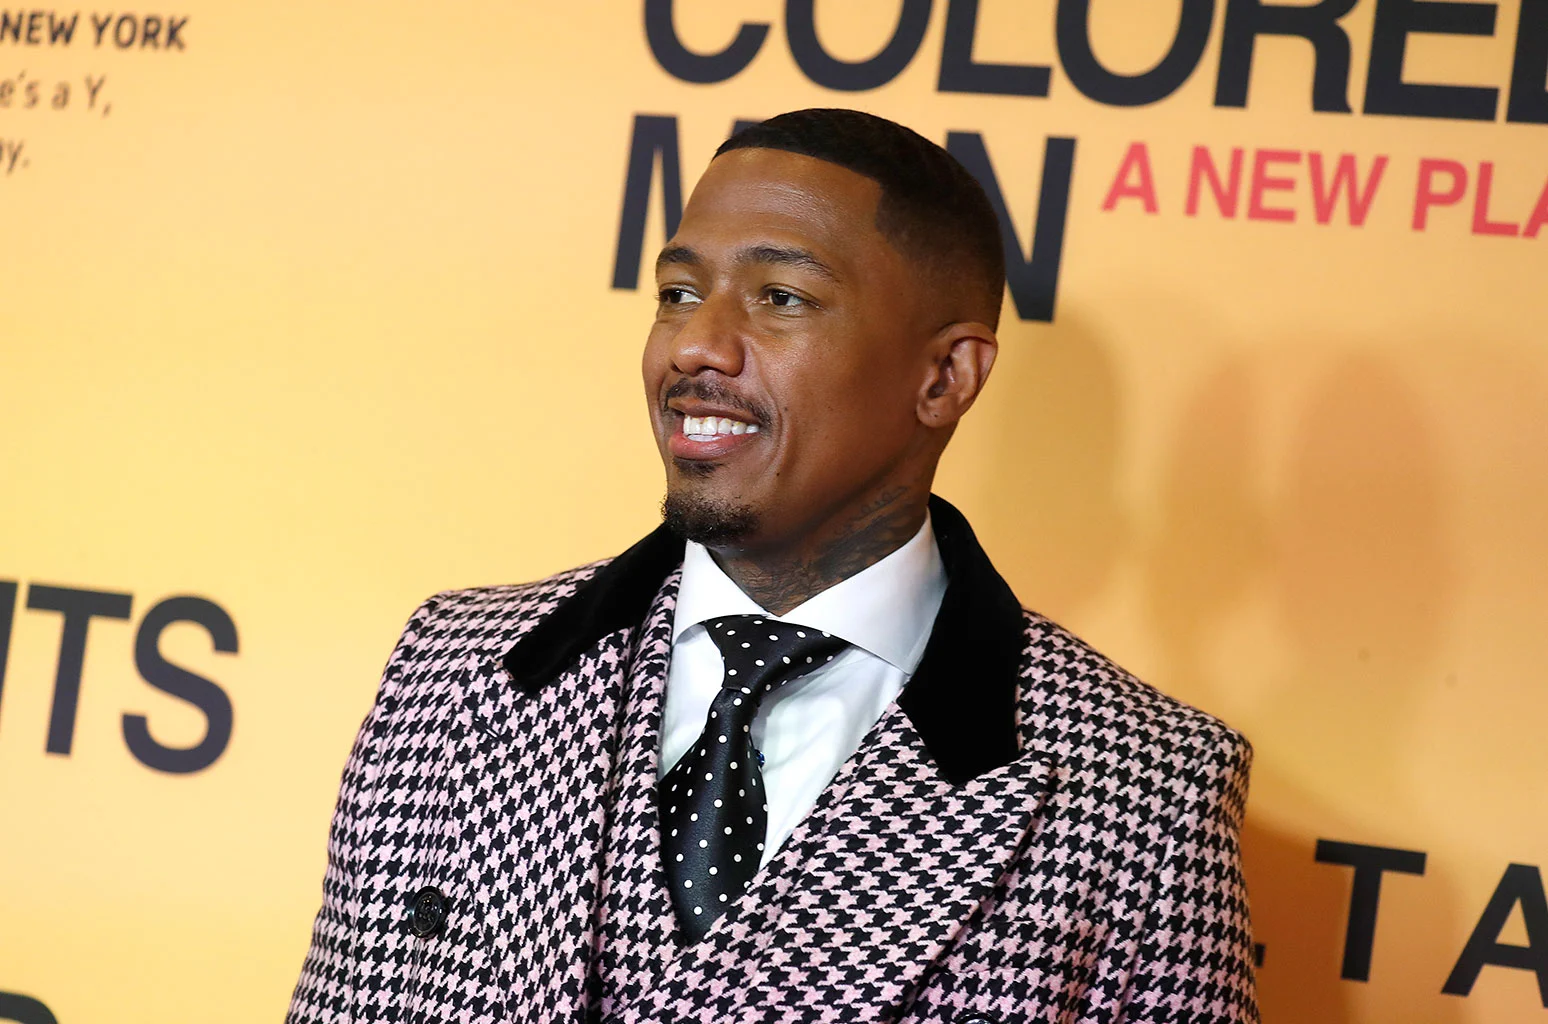 ”nick-cannon-has-a-9th-child-on-the-way-makes-fun-of-himself-in-advertisement”